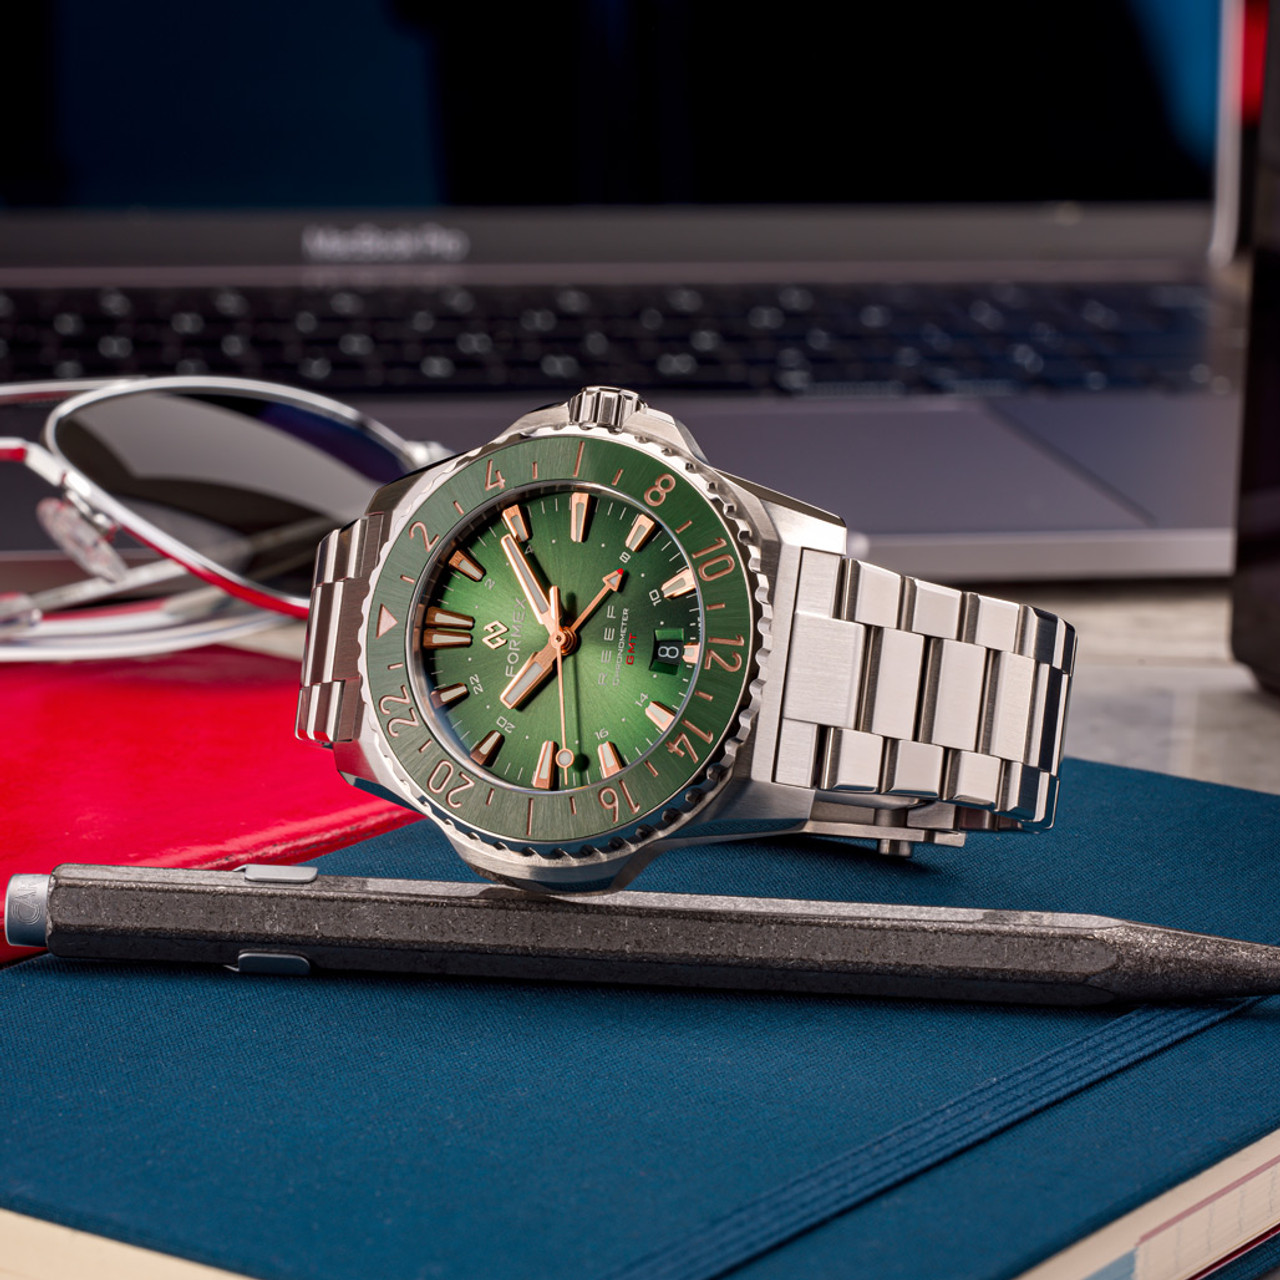 Formex REEF GMT Chronometer Dive Watch with Gilt Green Dial and Bezel  #2202.1.5388.100